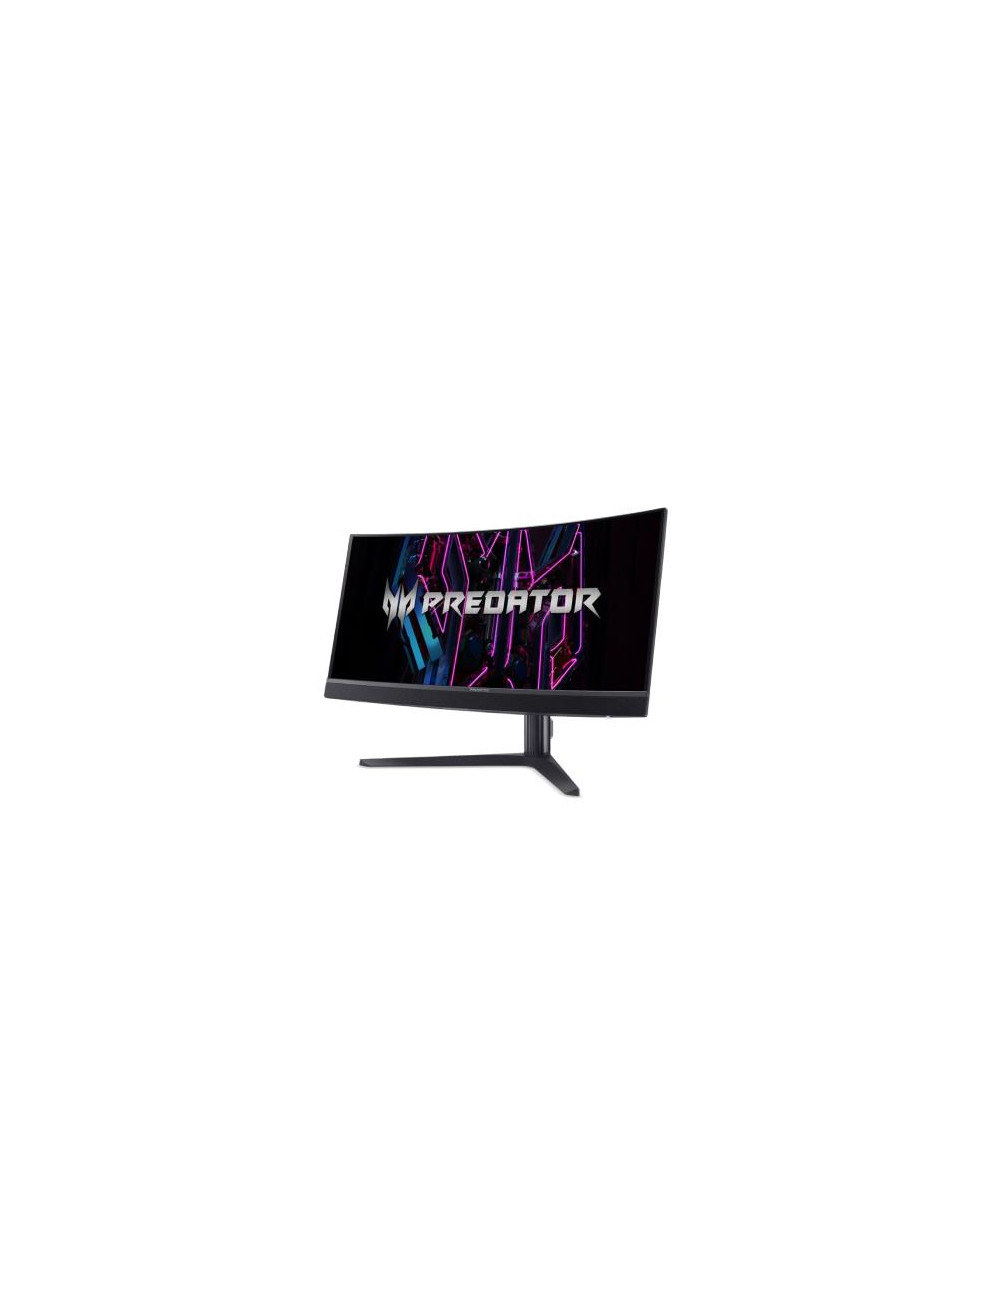 LCD Monitor|ACER|Predator X34Vbmiiphuzx|34"|Gaming/Curved/21 : 9|Panel OLED|3440x1440|21:9|0.1 ms|Speakers|Swivel|Height adjusta